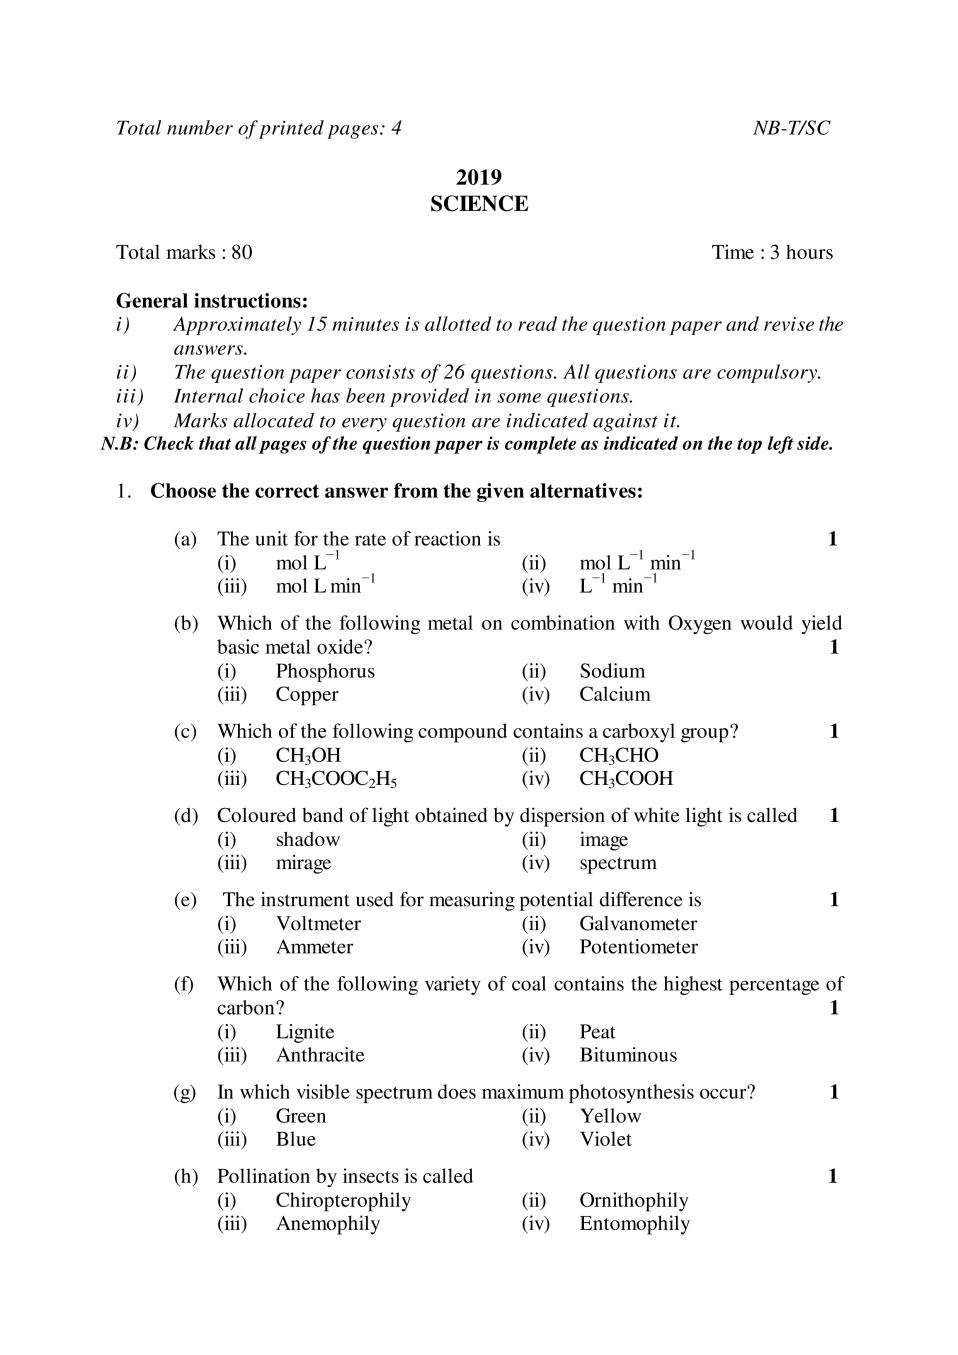 NBSE Class 10 Question Paper 2019 for Science - Page 1